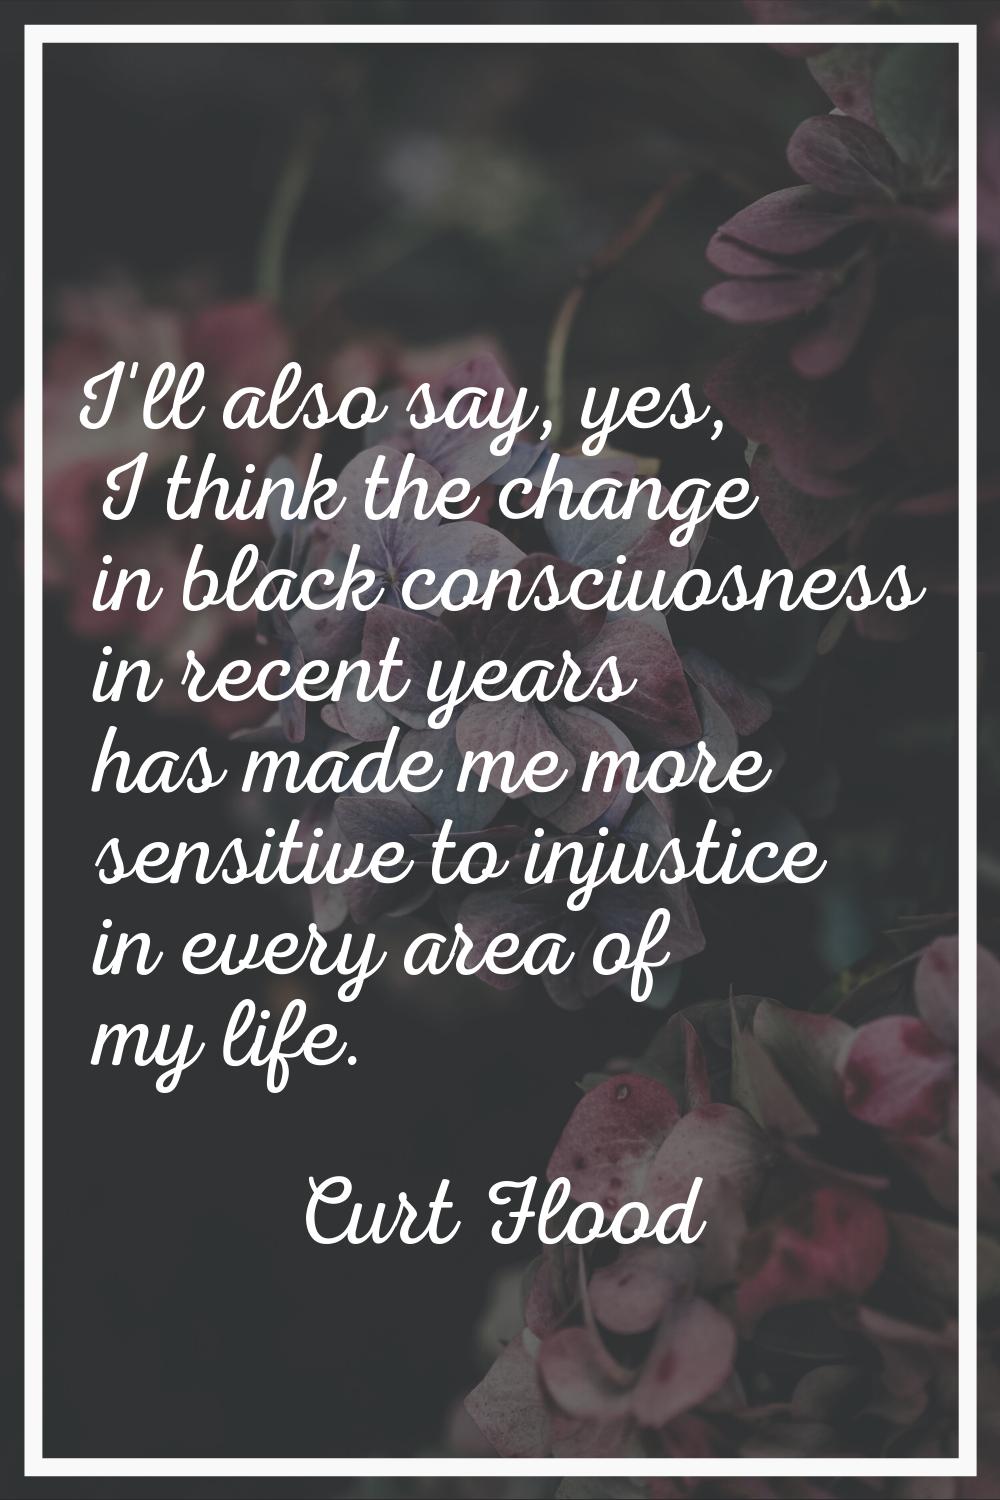 I'll also say, yes, I think the change in black consciuosness in recent years has made me more sens